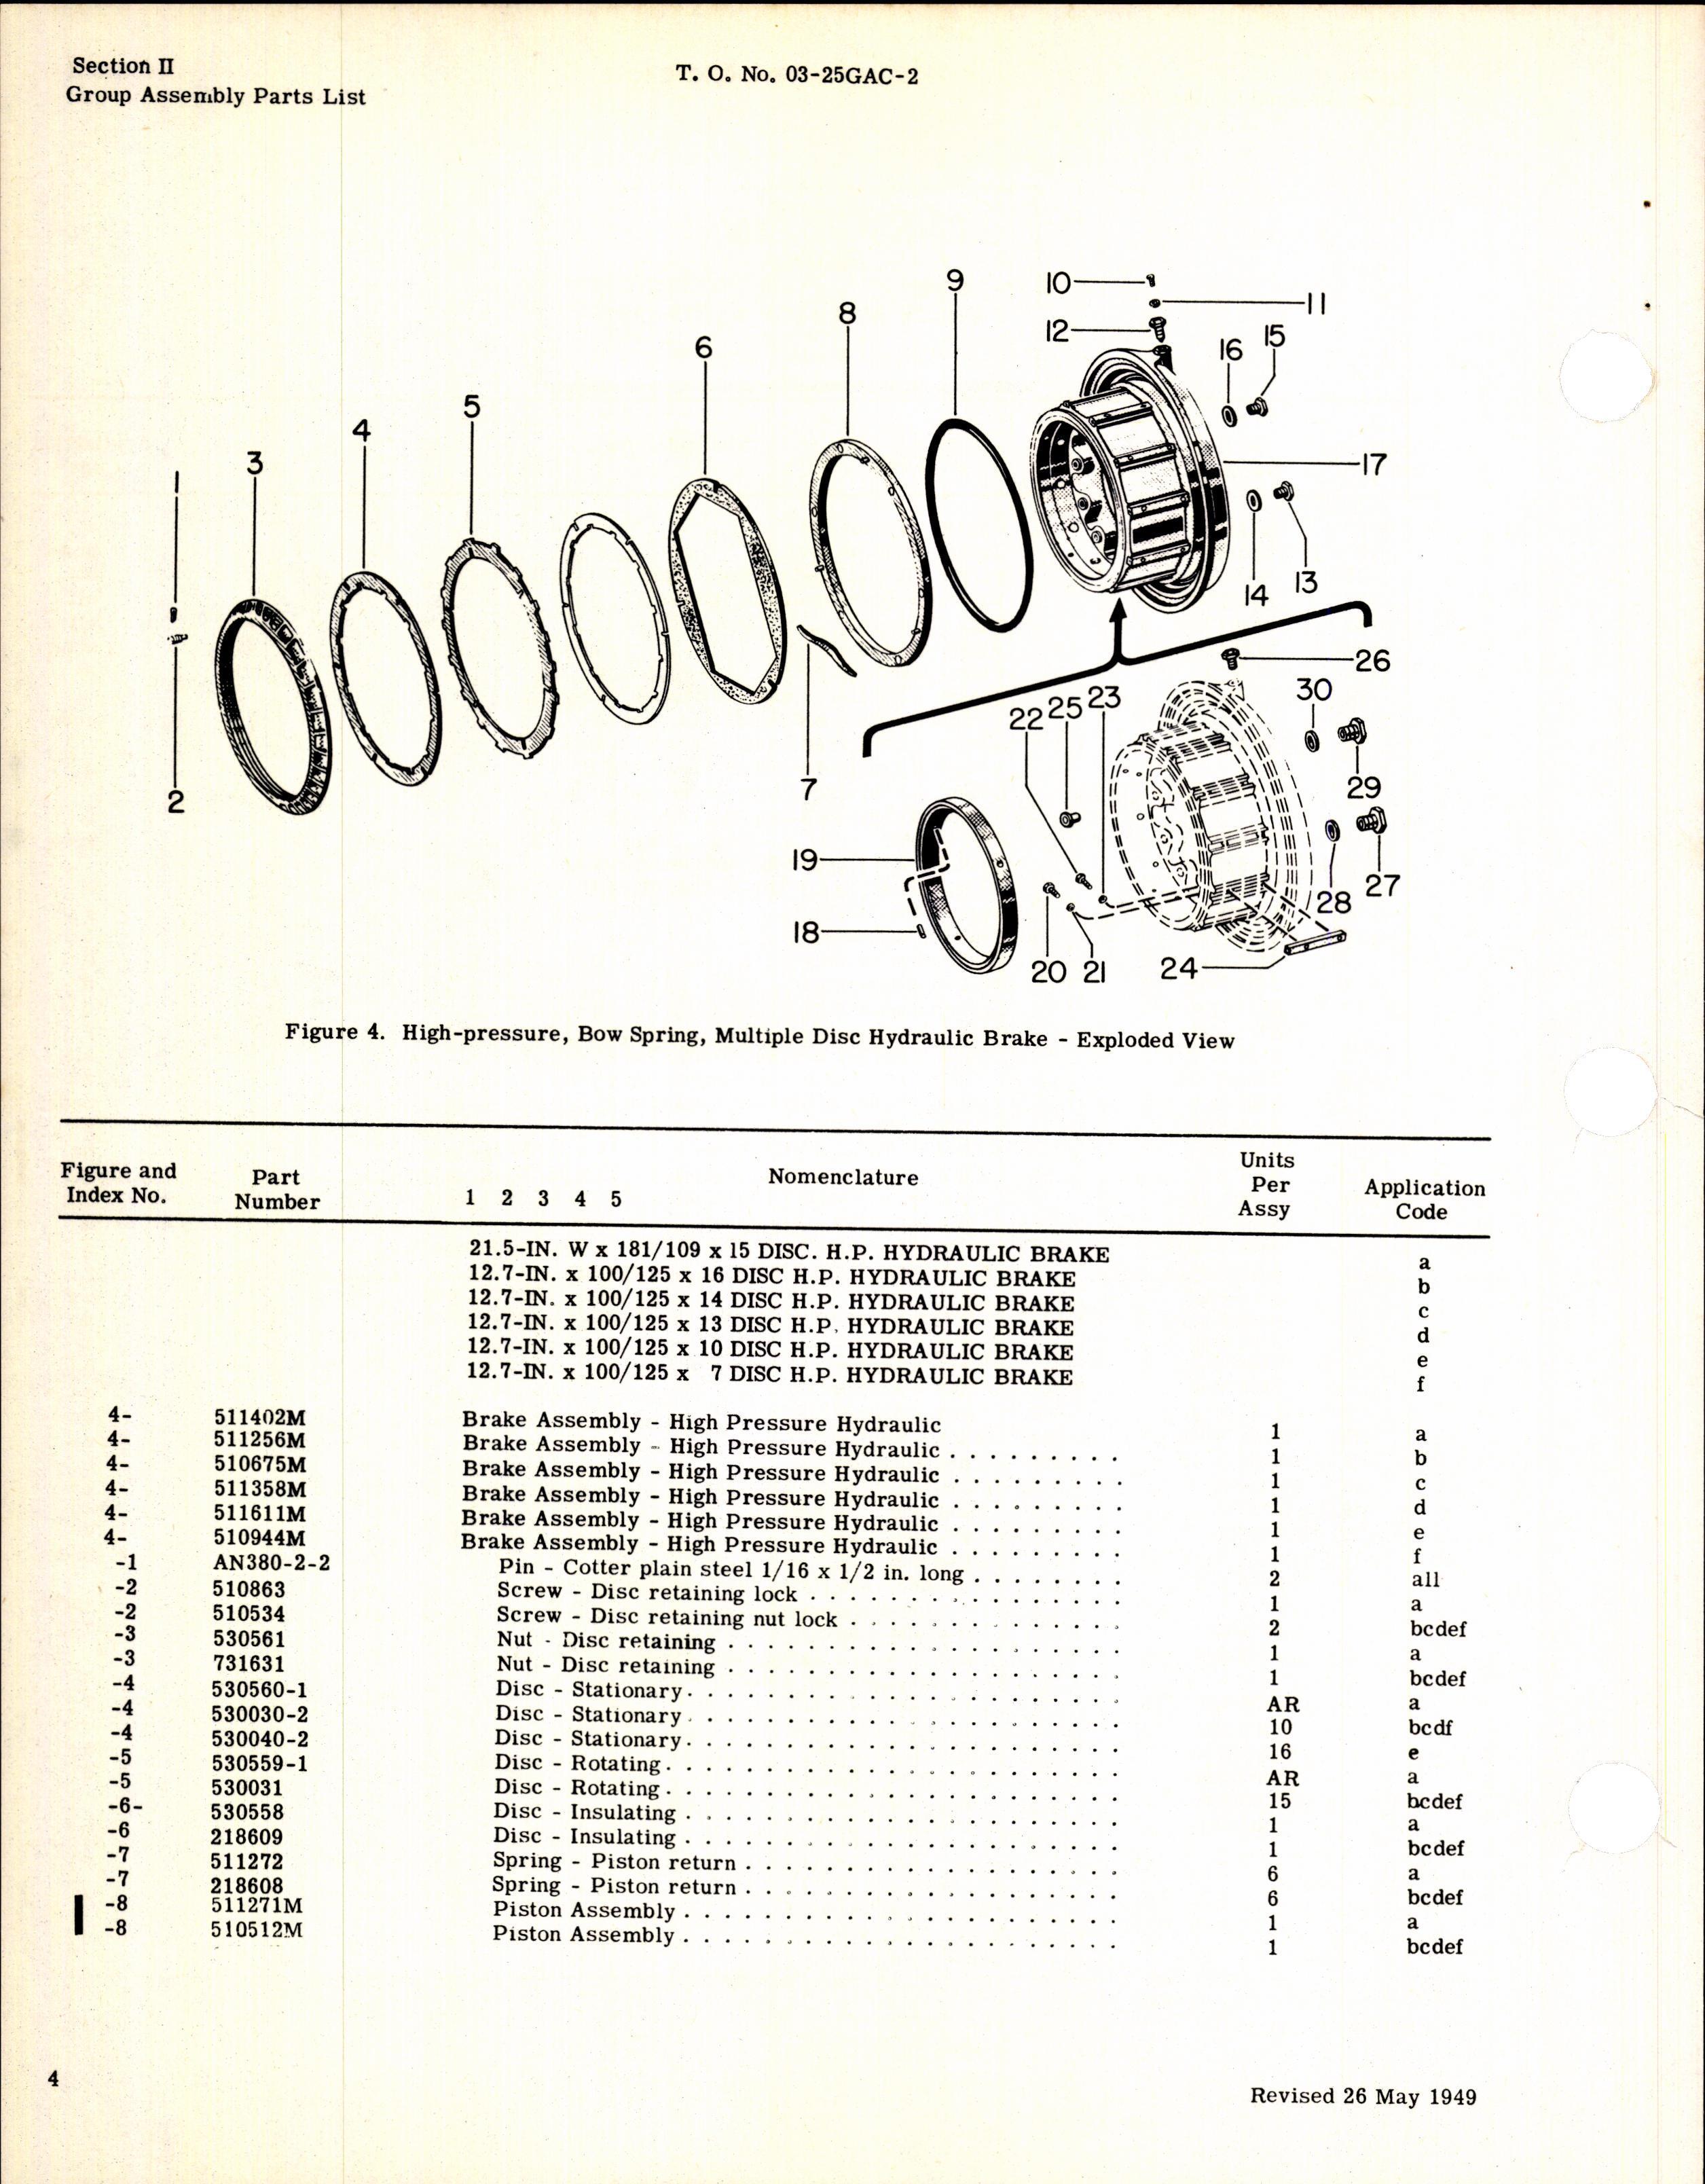 Sample page 8 from AirCorps Library document: Parts Catalog  for Multiple Disk Brakes (Goodyear)